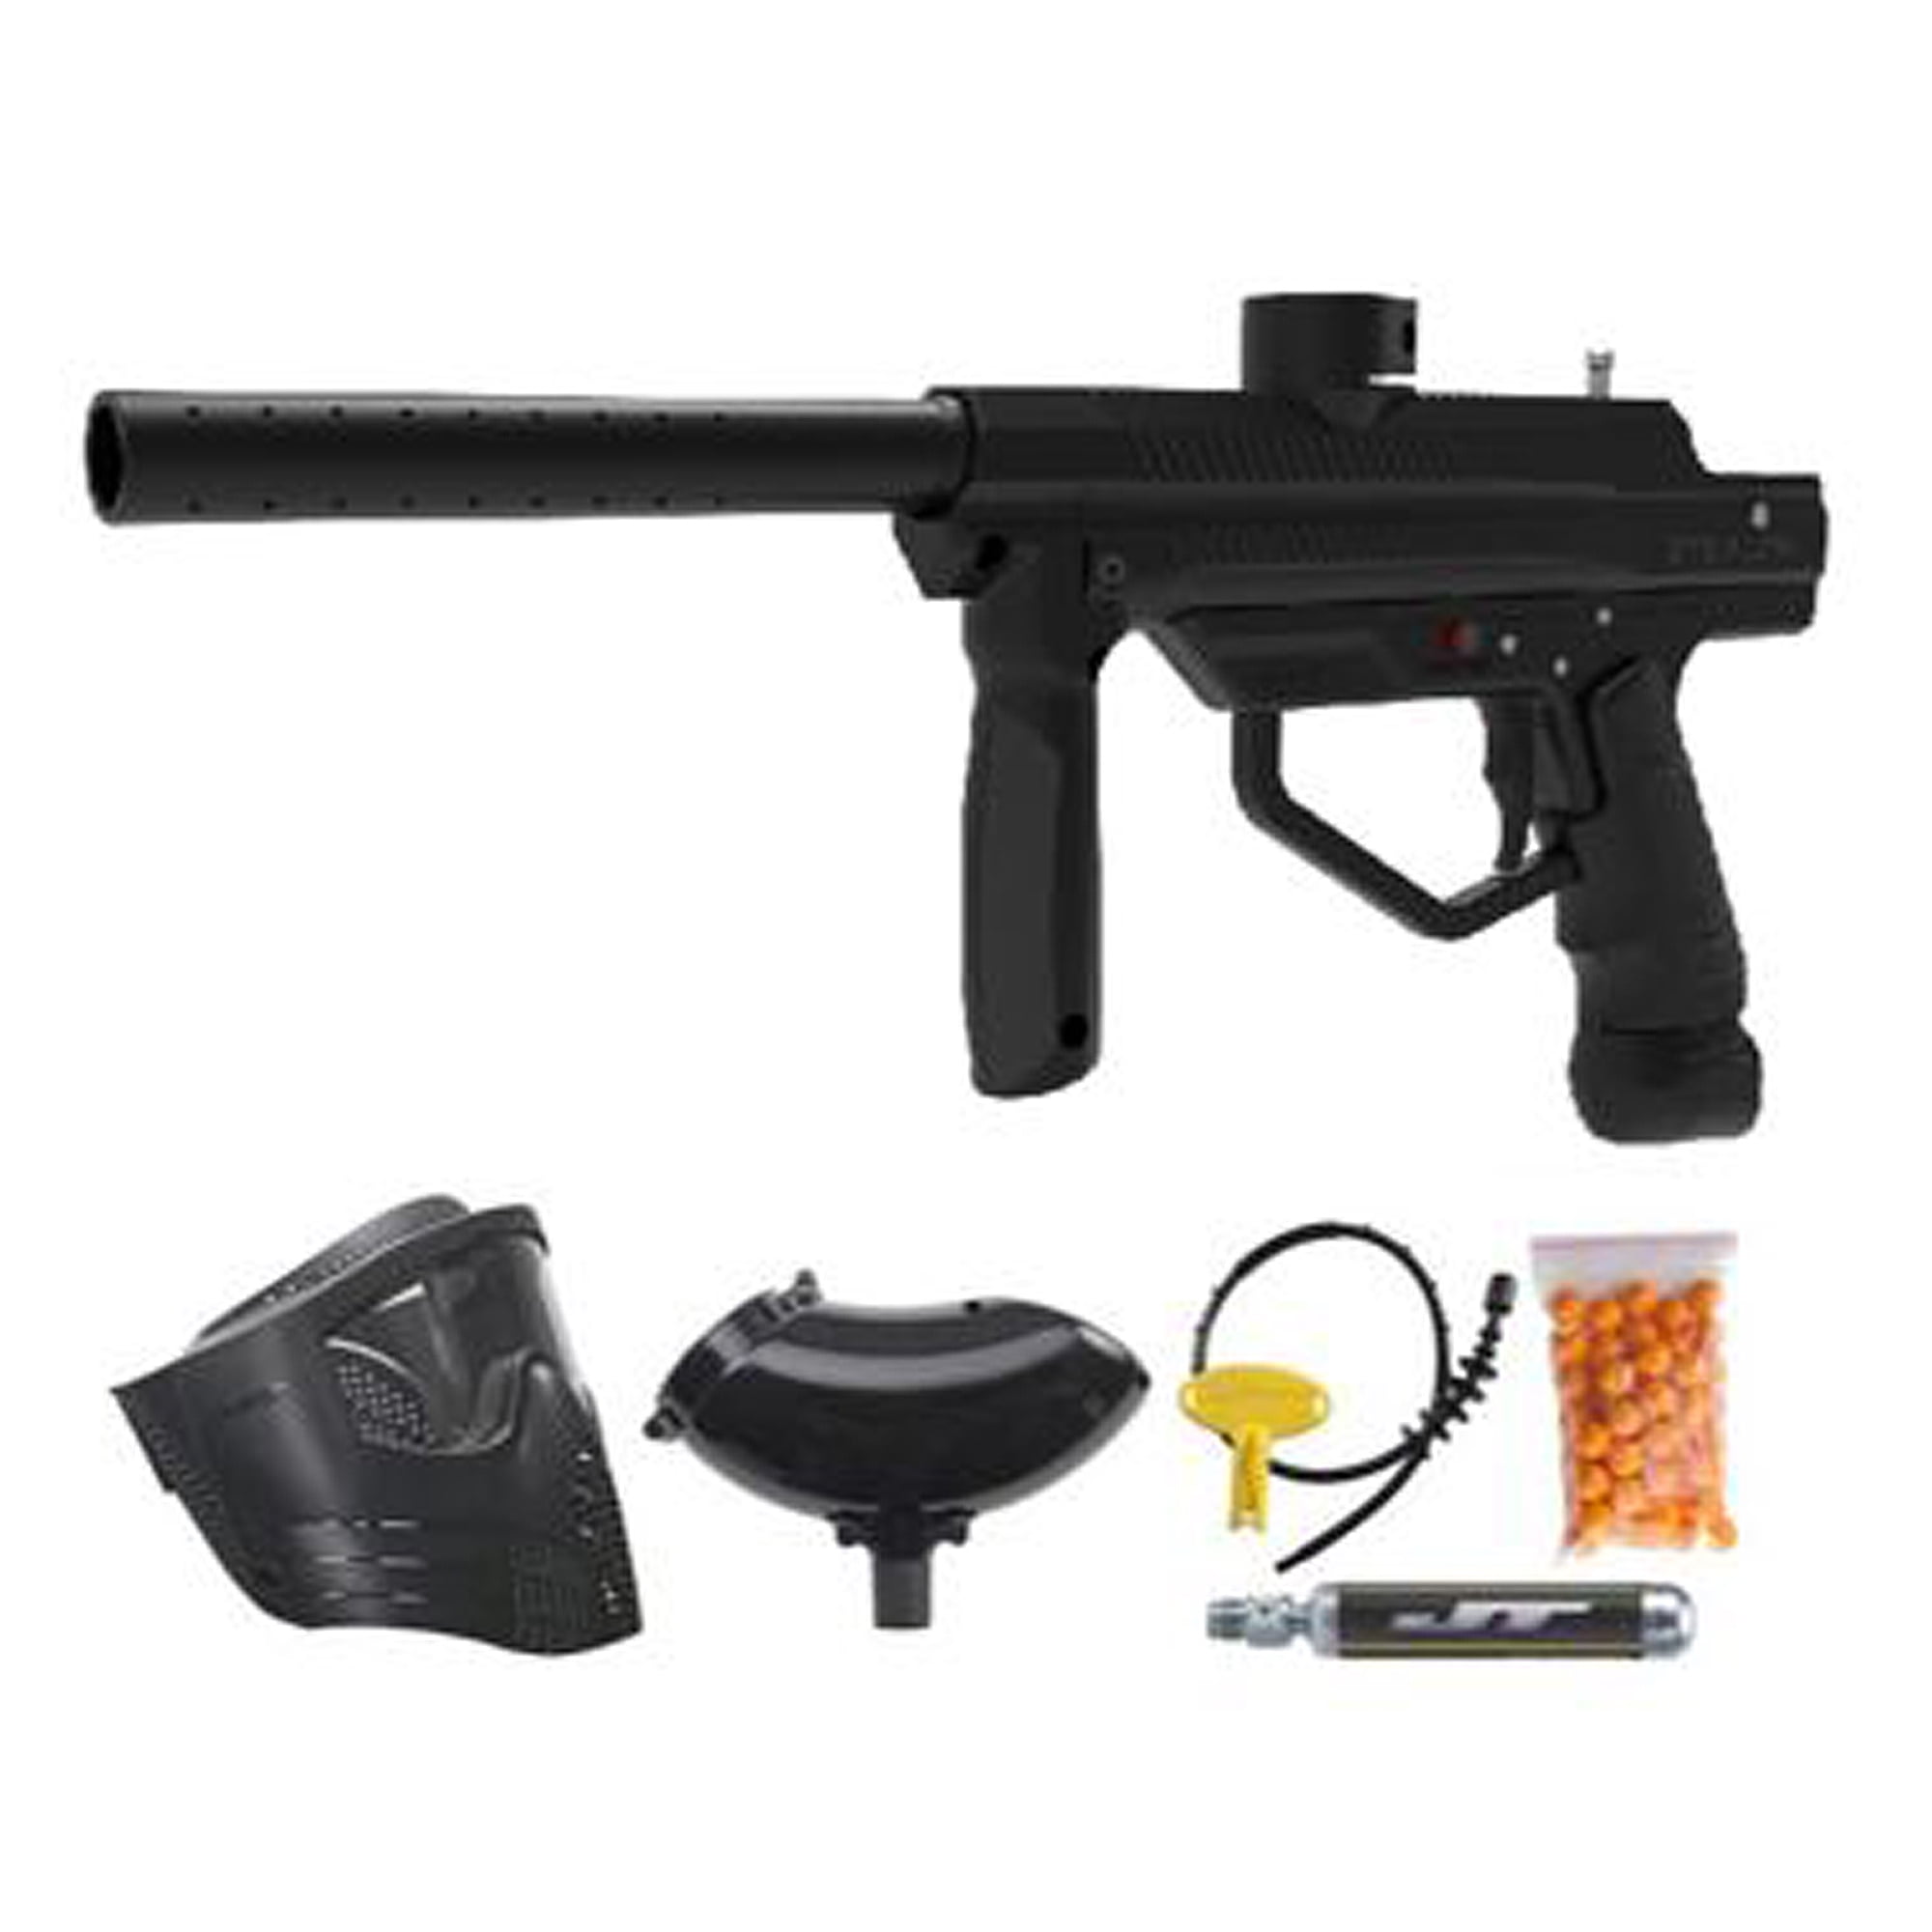 JT Stealth Ready to Play Paintball Marker Gun Kit includes Goggle